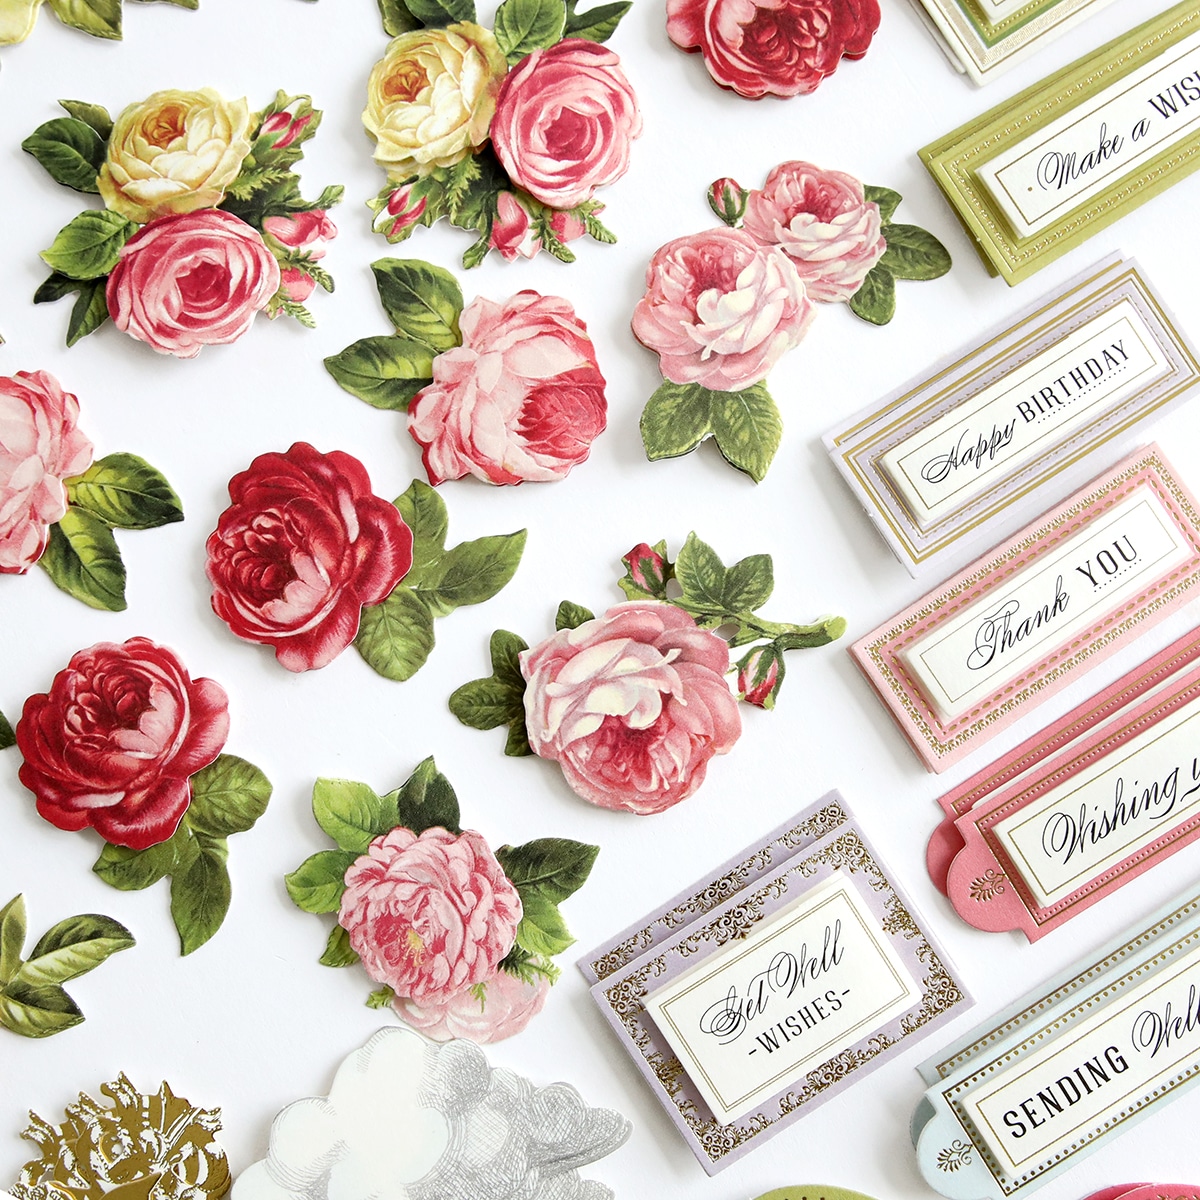 A collection of paper roses and tags on a white surface.